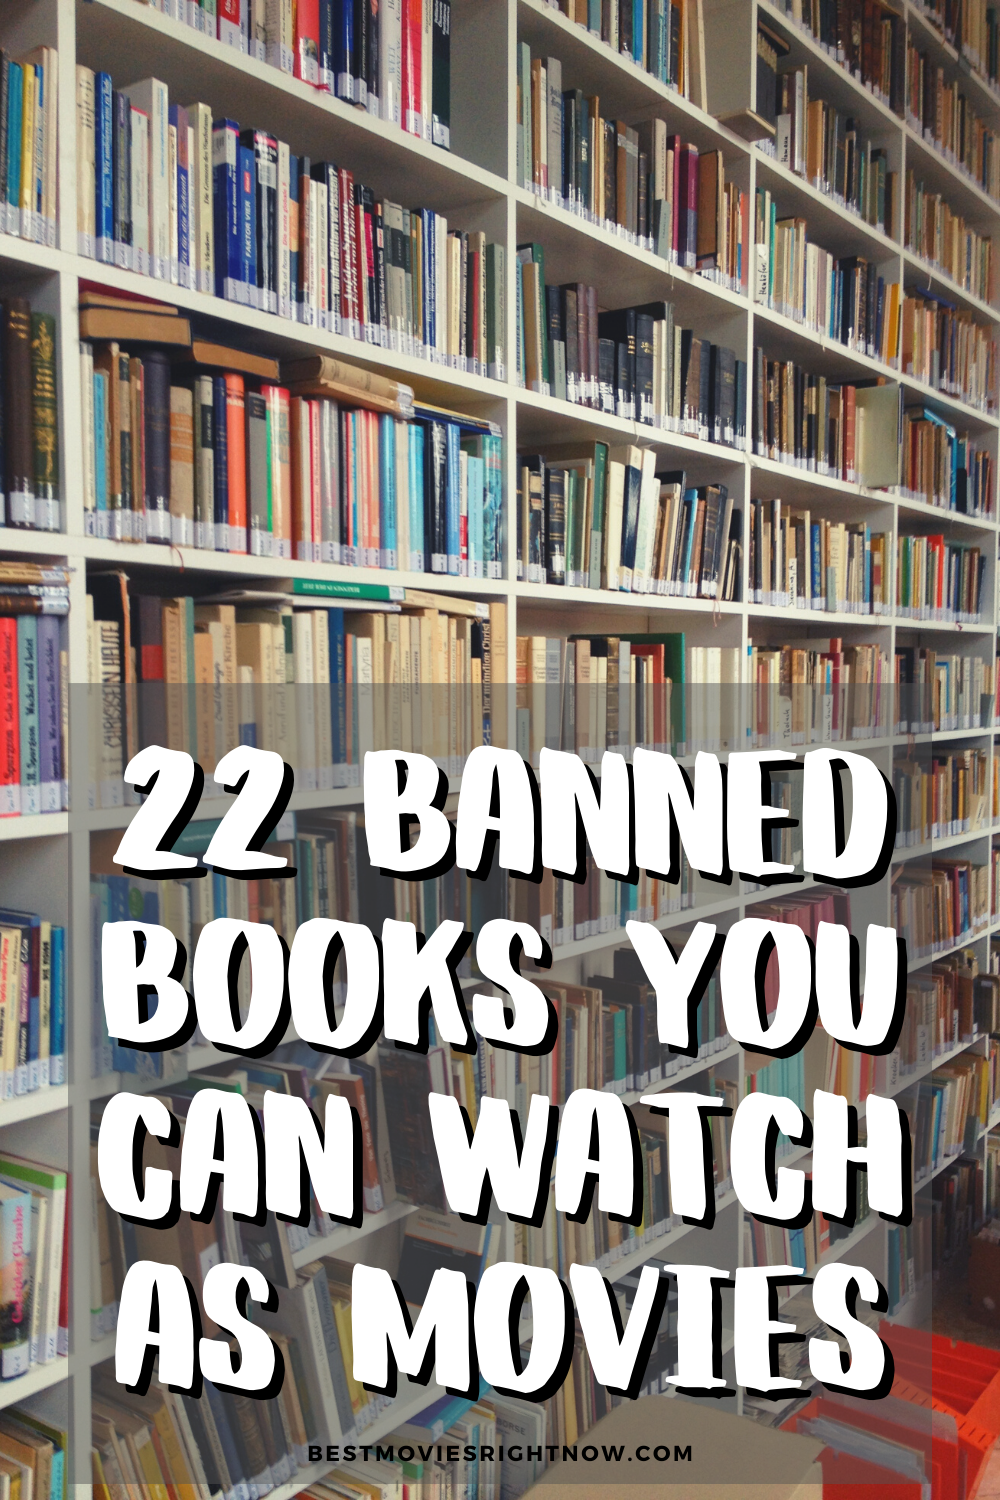 image of books with text that relates to banned books turned into movies